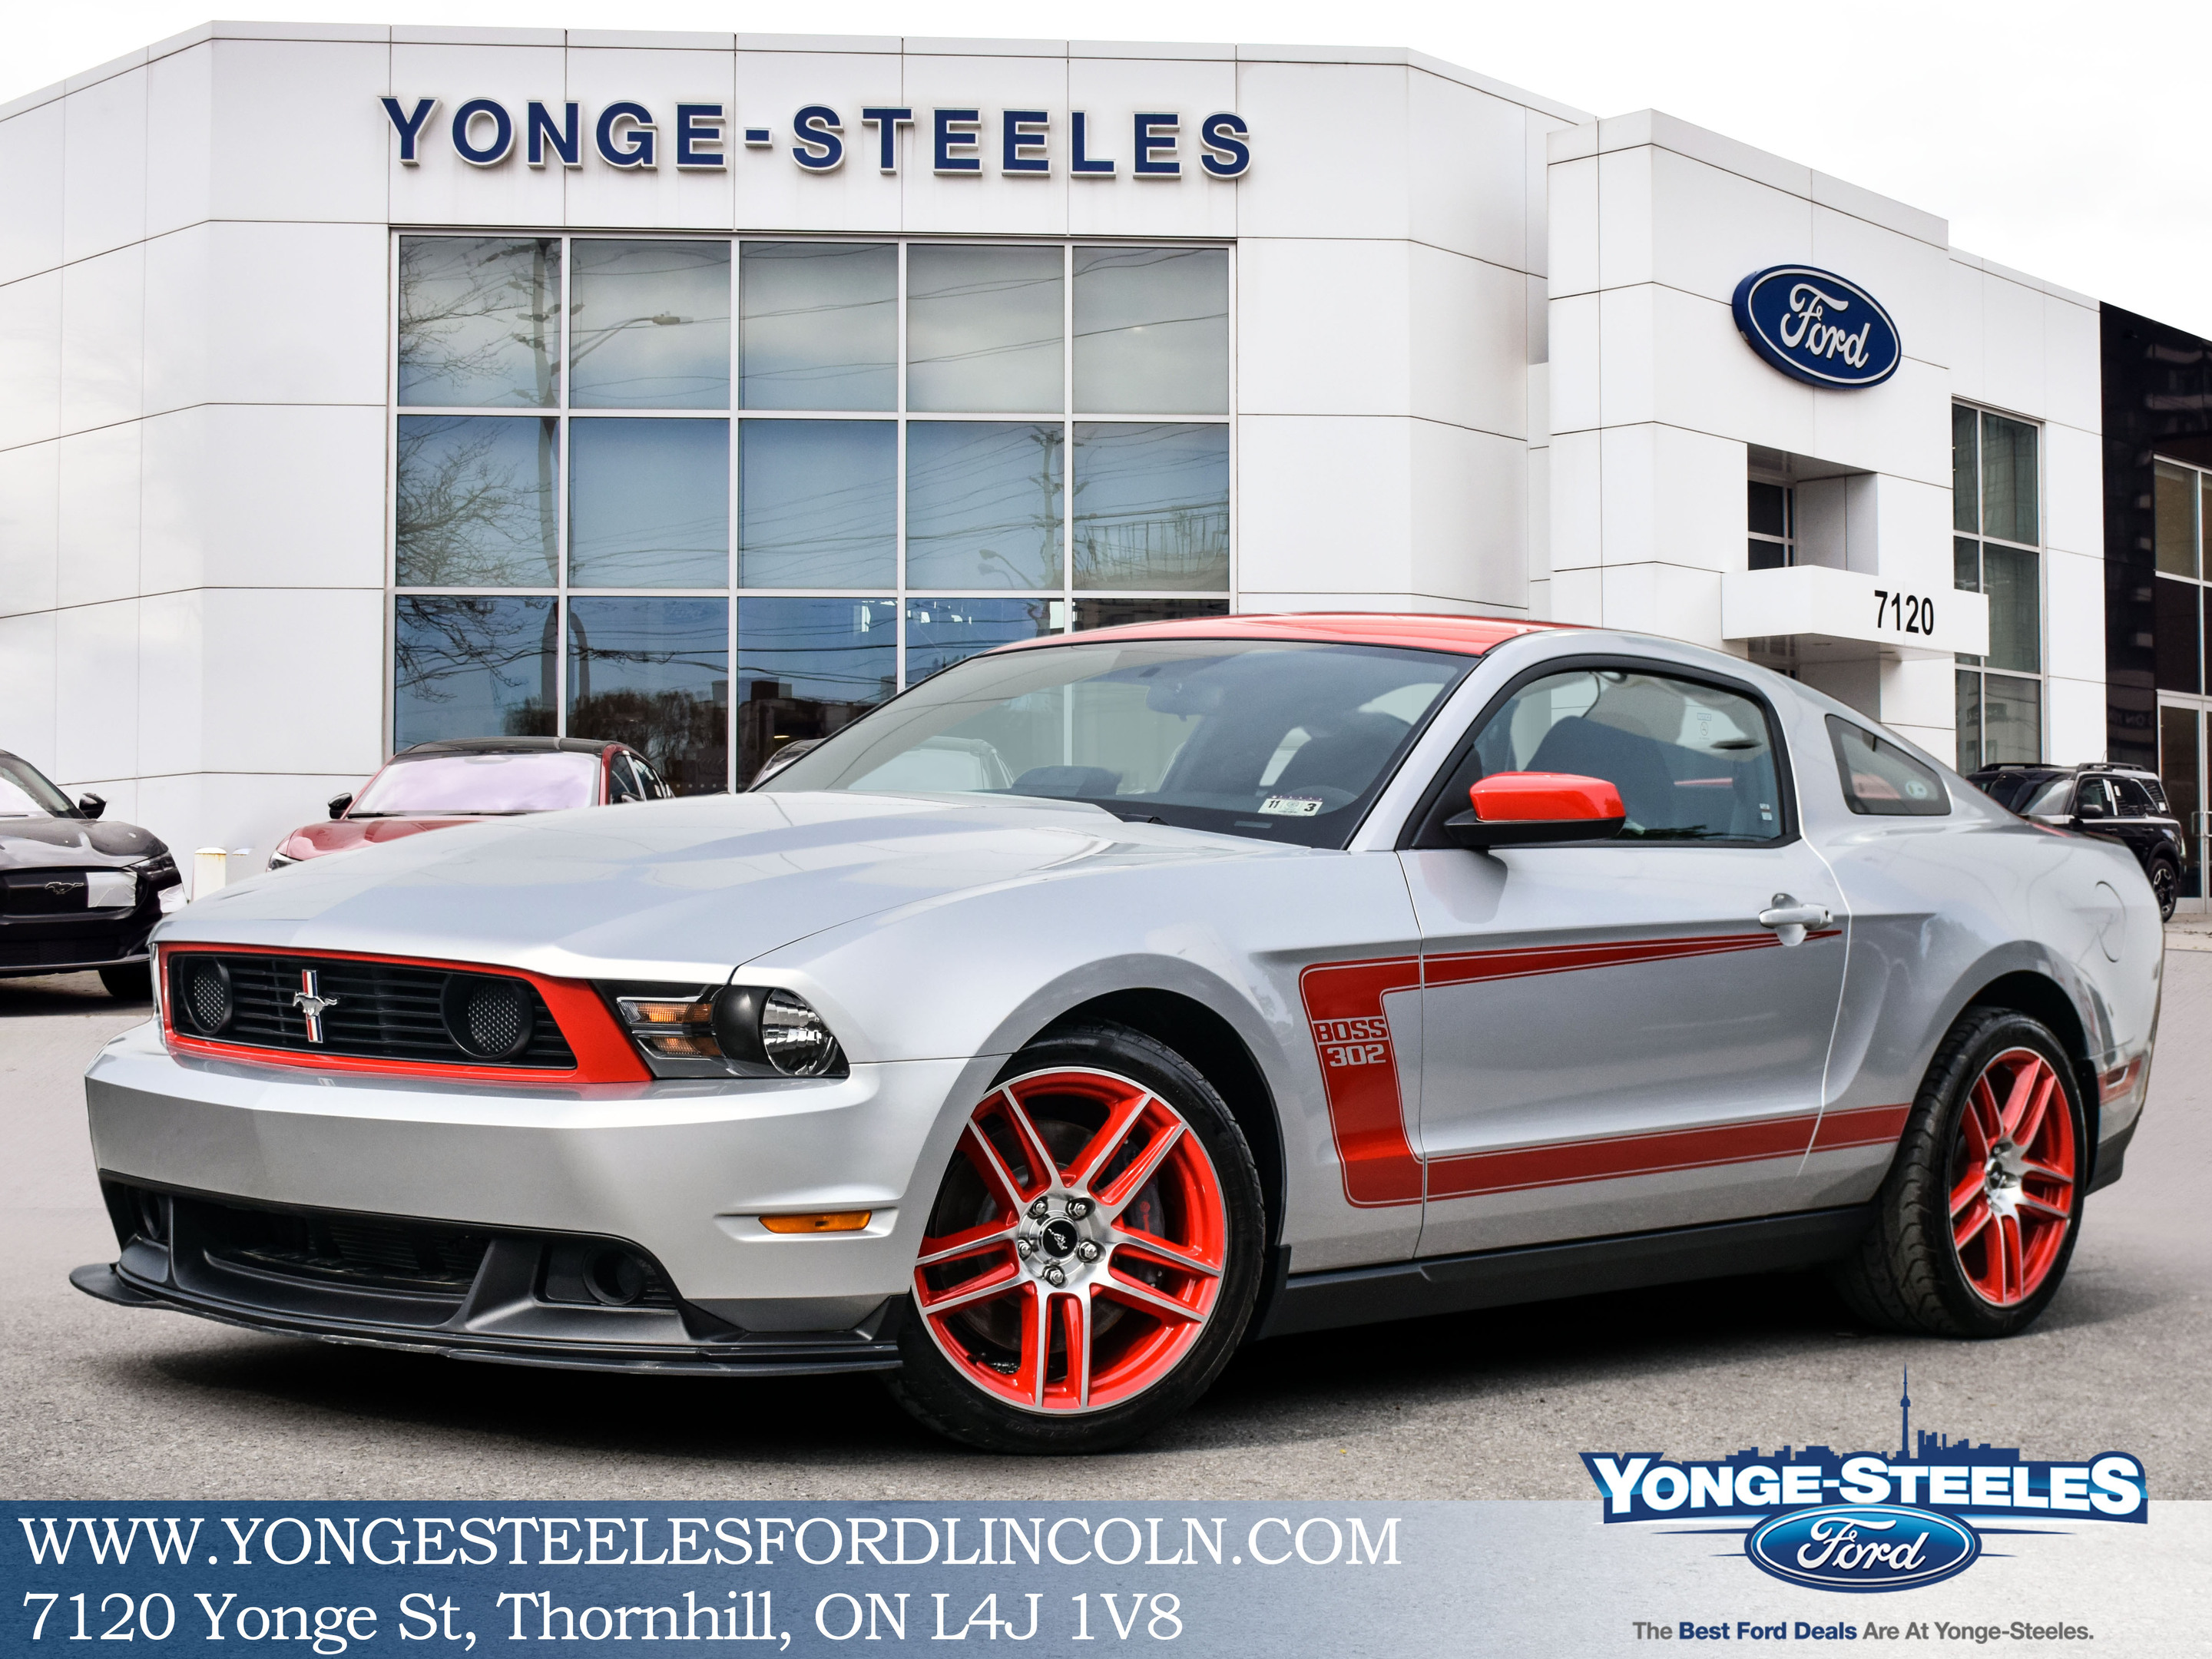 2012 Ford Mustang Boss 302 LAGUNA SECA DELIVERY KMS A RARE FIND